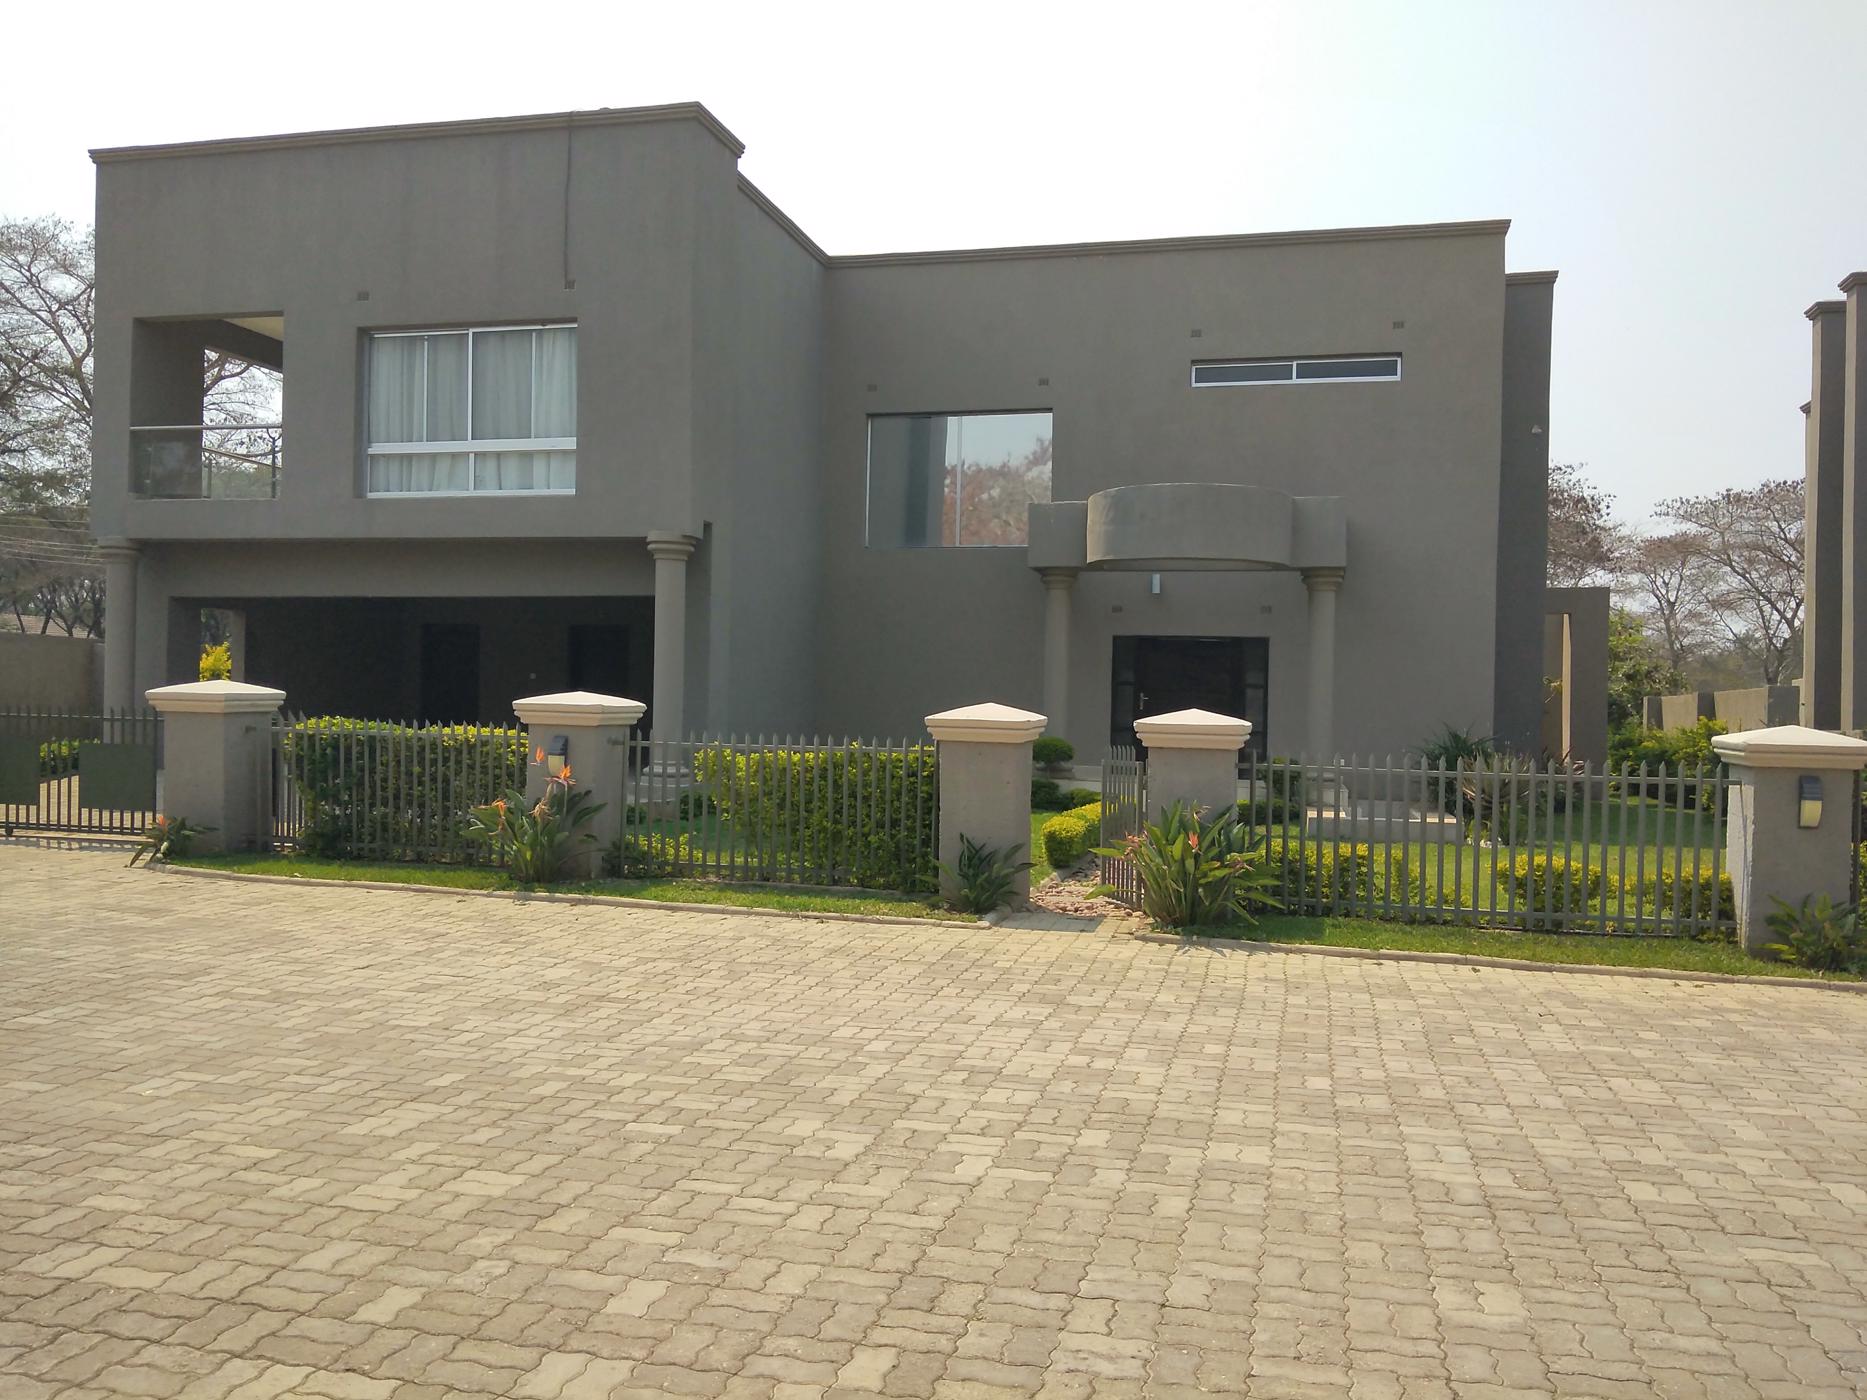 3 bedroom house to rent in Lilayi (Zambia)